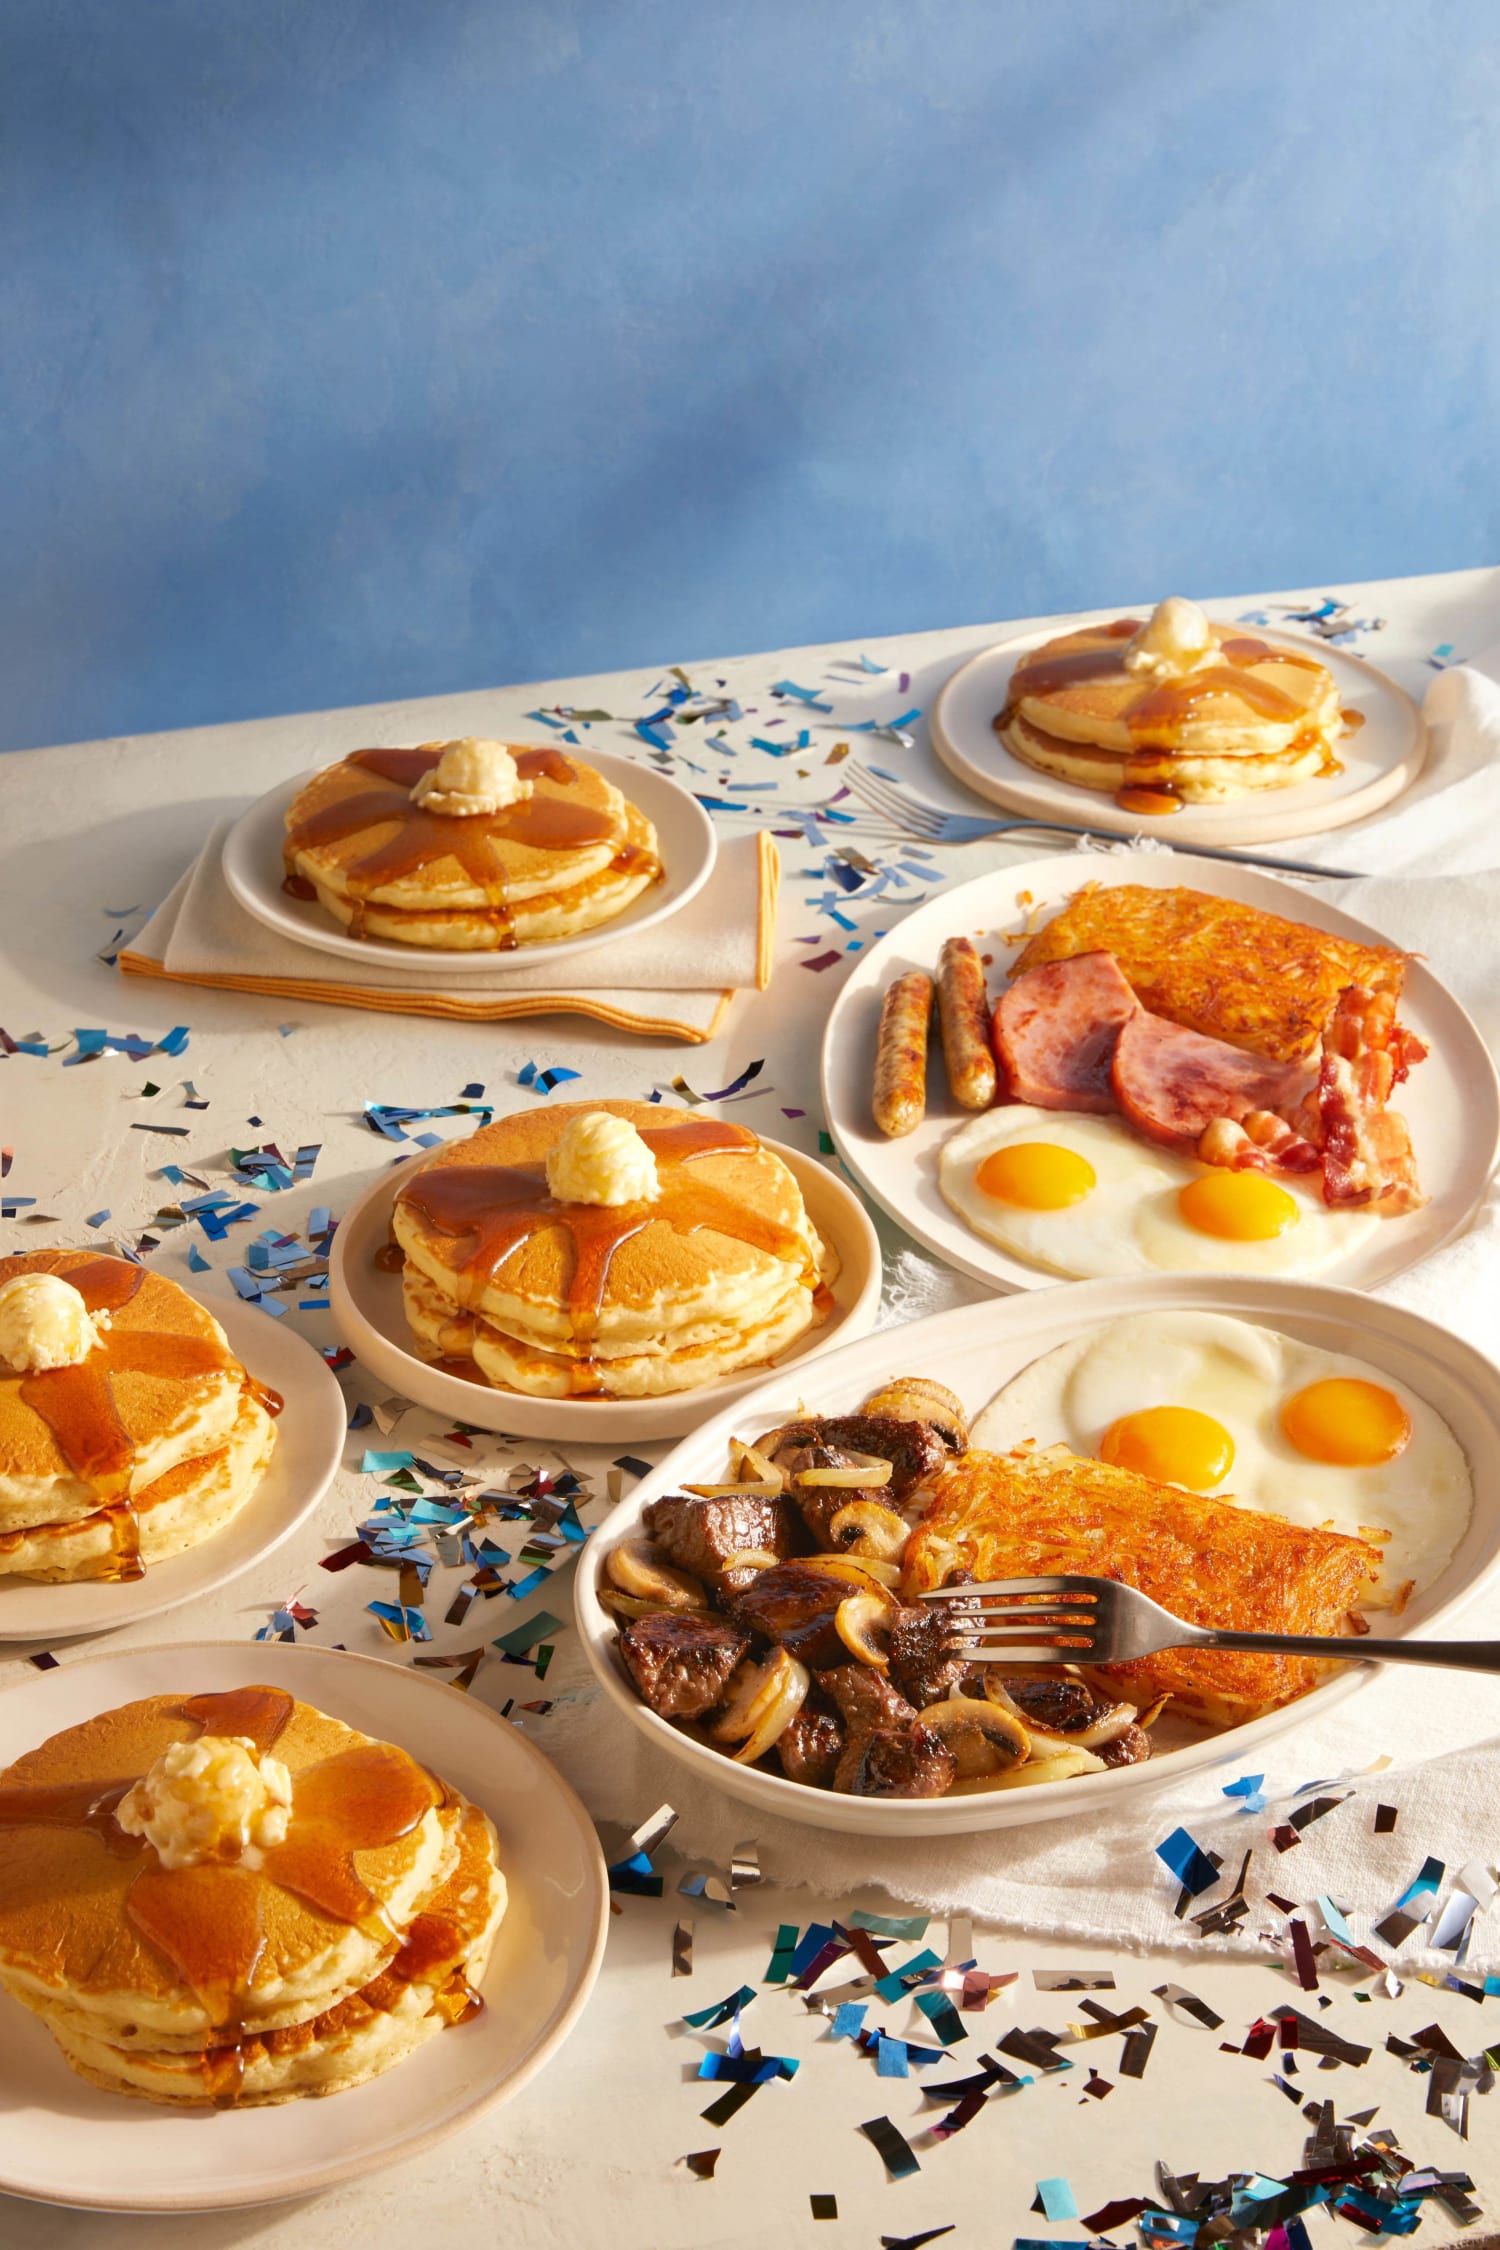 IHOP Offers $5 All-You-Can-Eat Pancakes For Its 65th Birthday